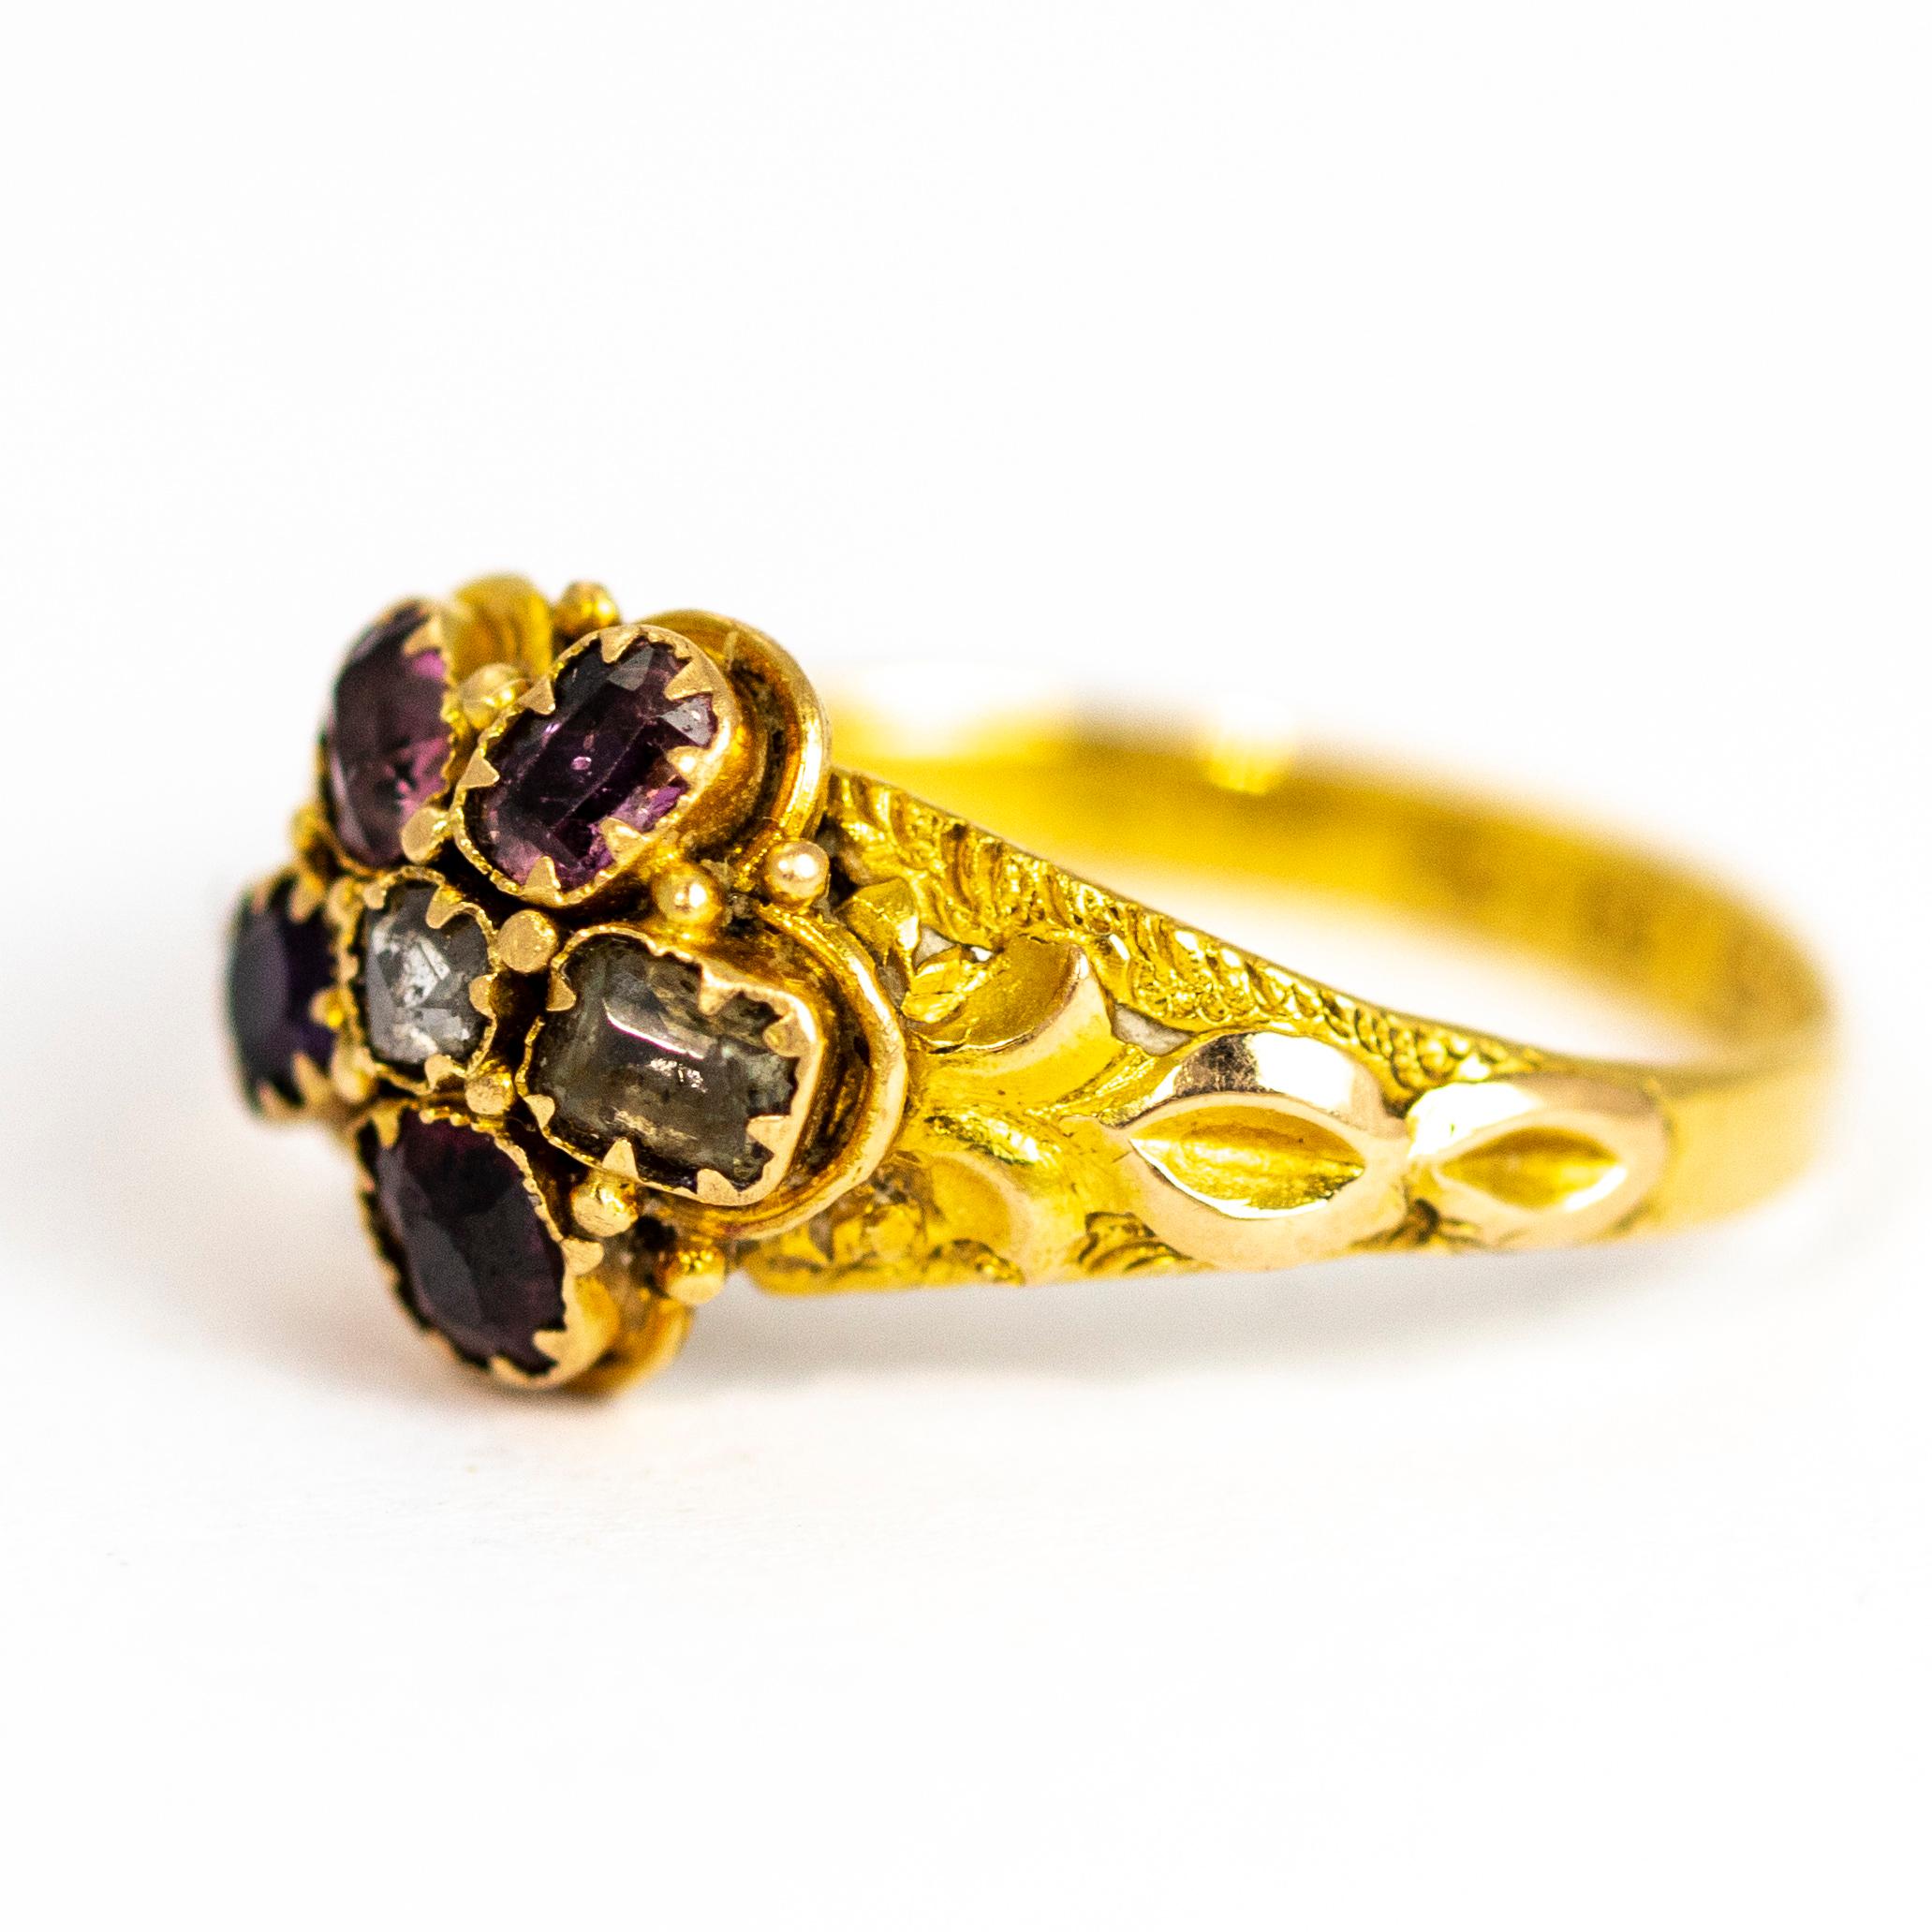 An exemplary antique Georgian regard ring. The first letter of each of the beautiful stones in this cluster spells 